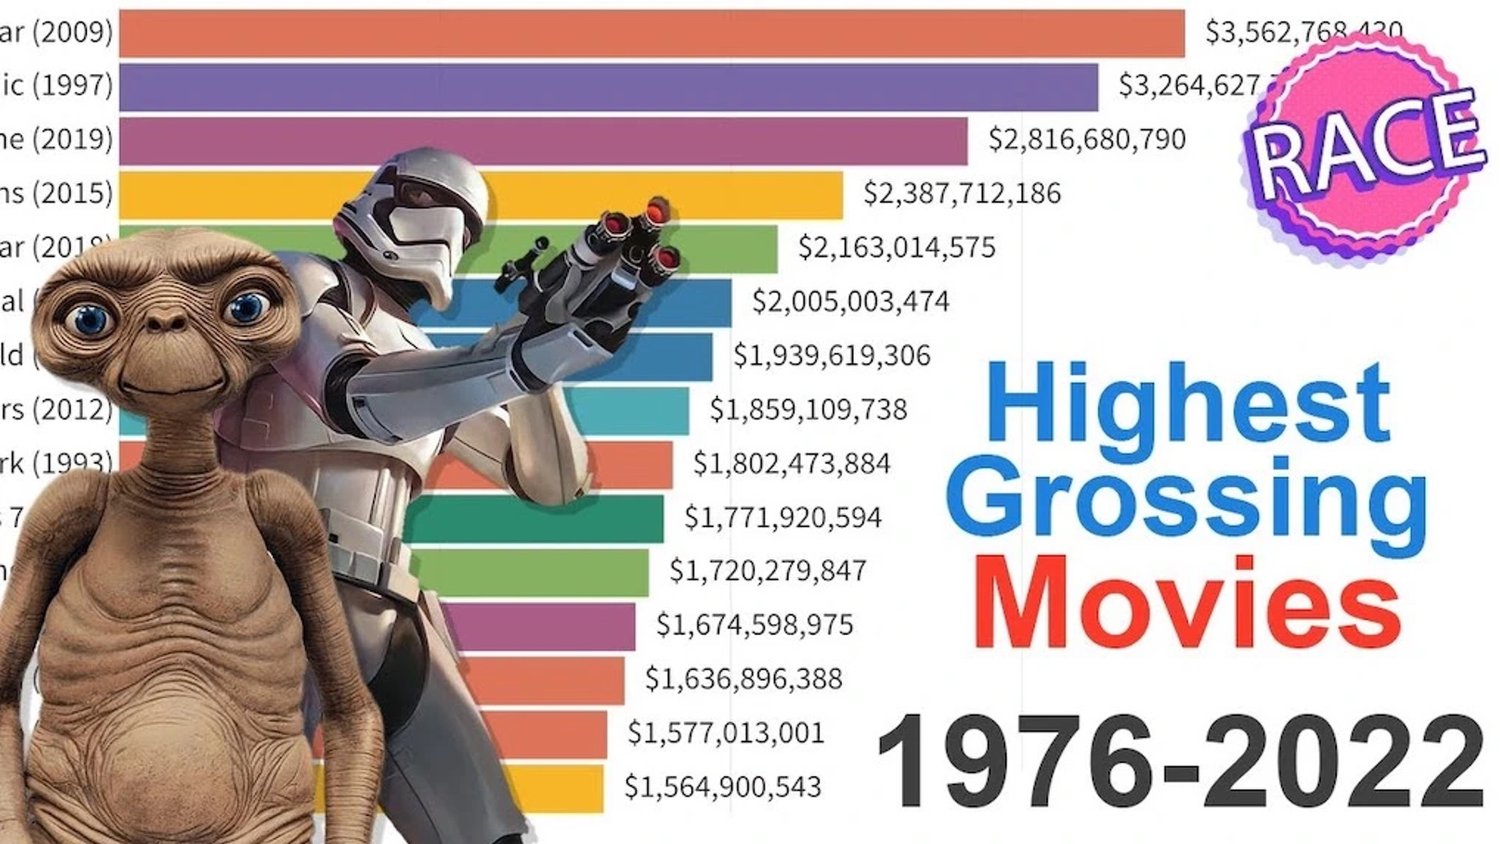 Video Visualization of the Highest Grossing Movies of All Time From